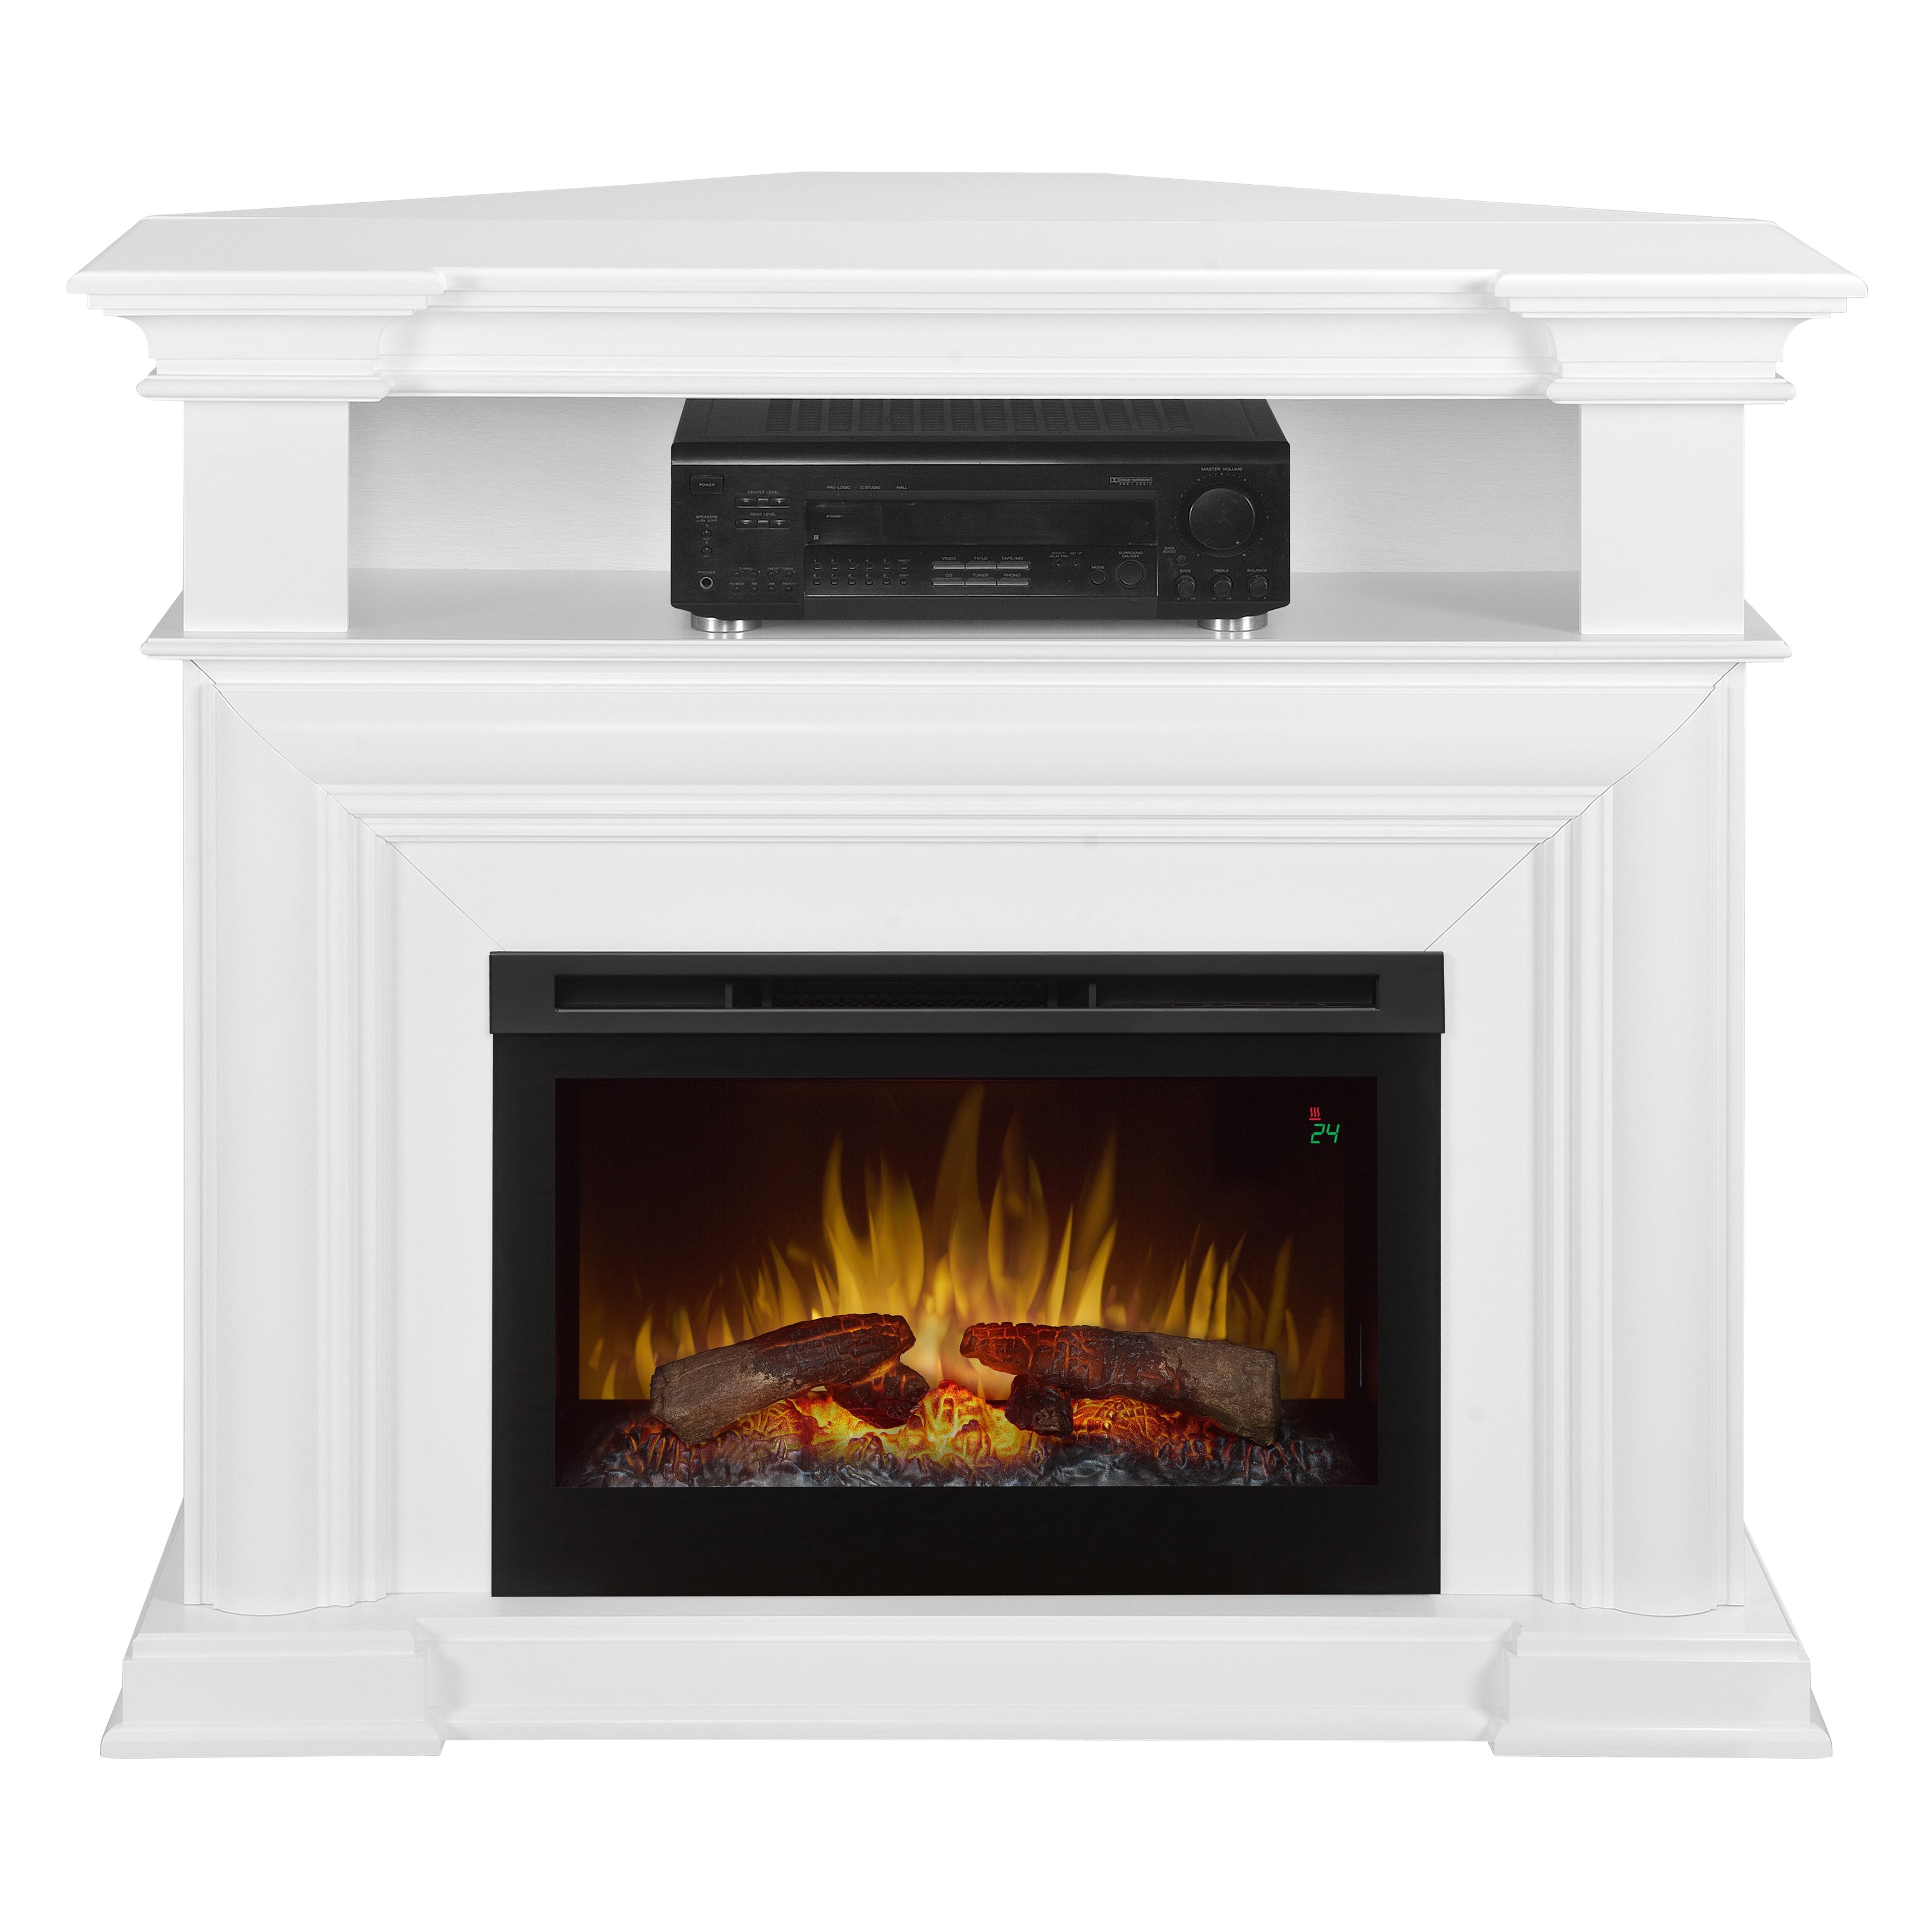 Natural Gas Ventless Fireplace Insert Lovely Electric Log Inserts for Existing Fireplaces Natural Gas